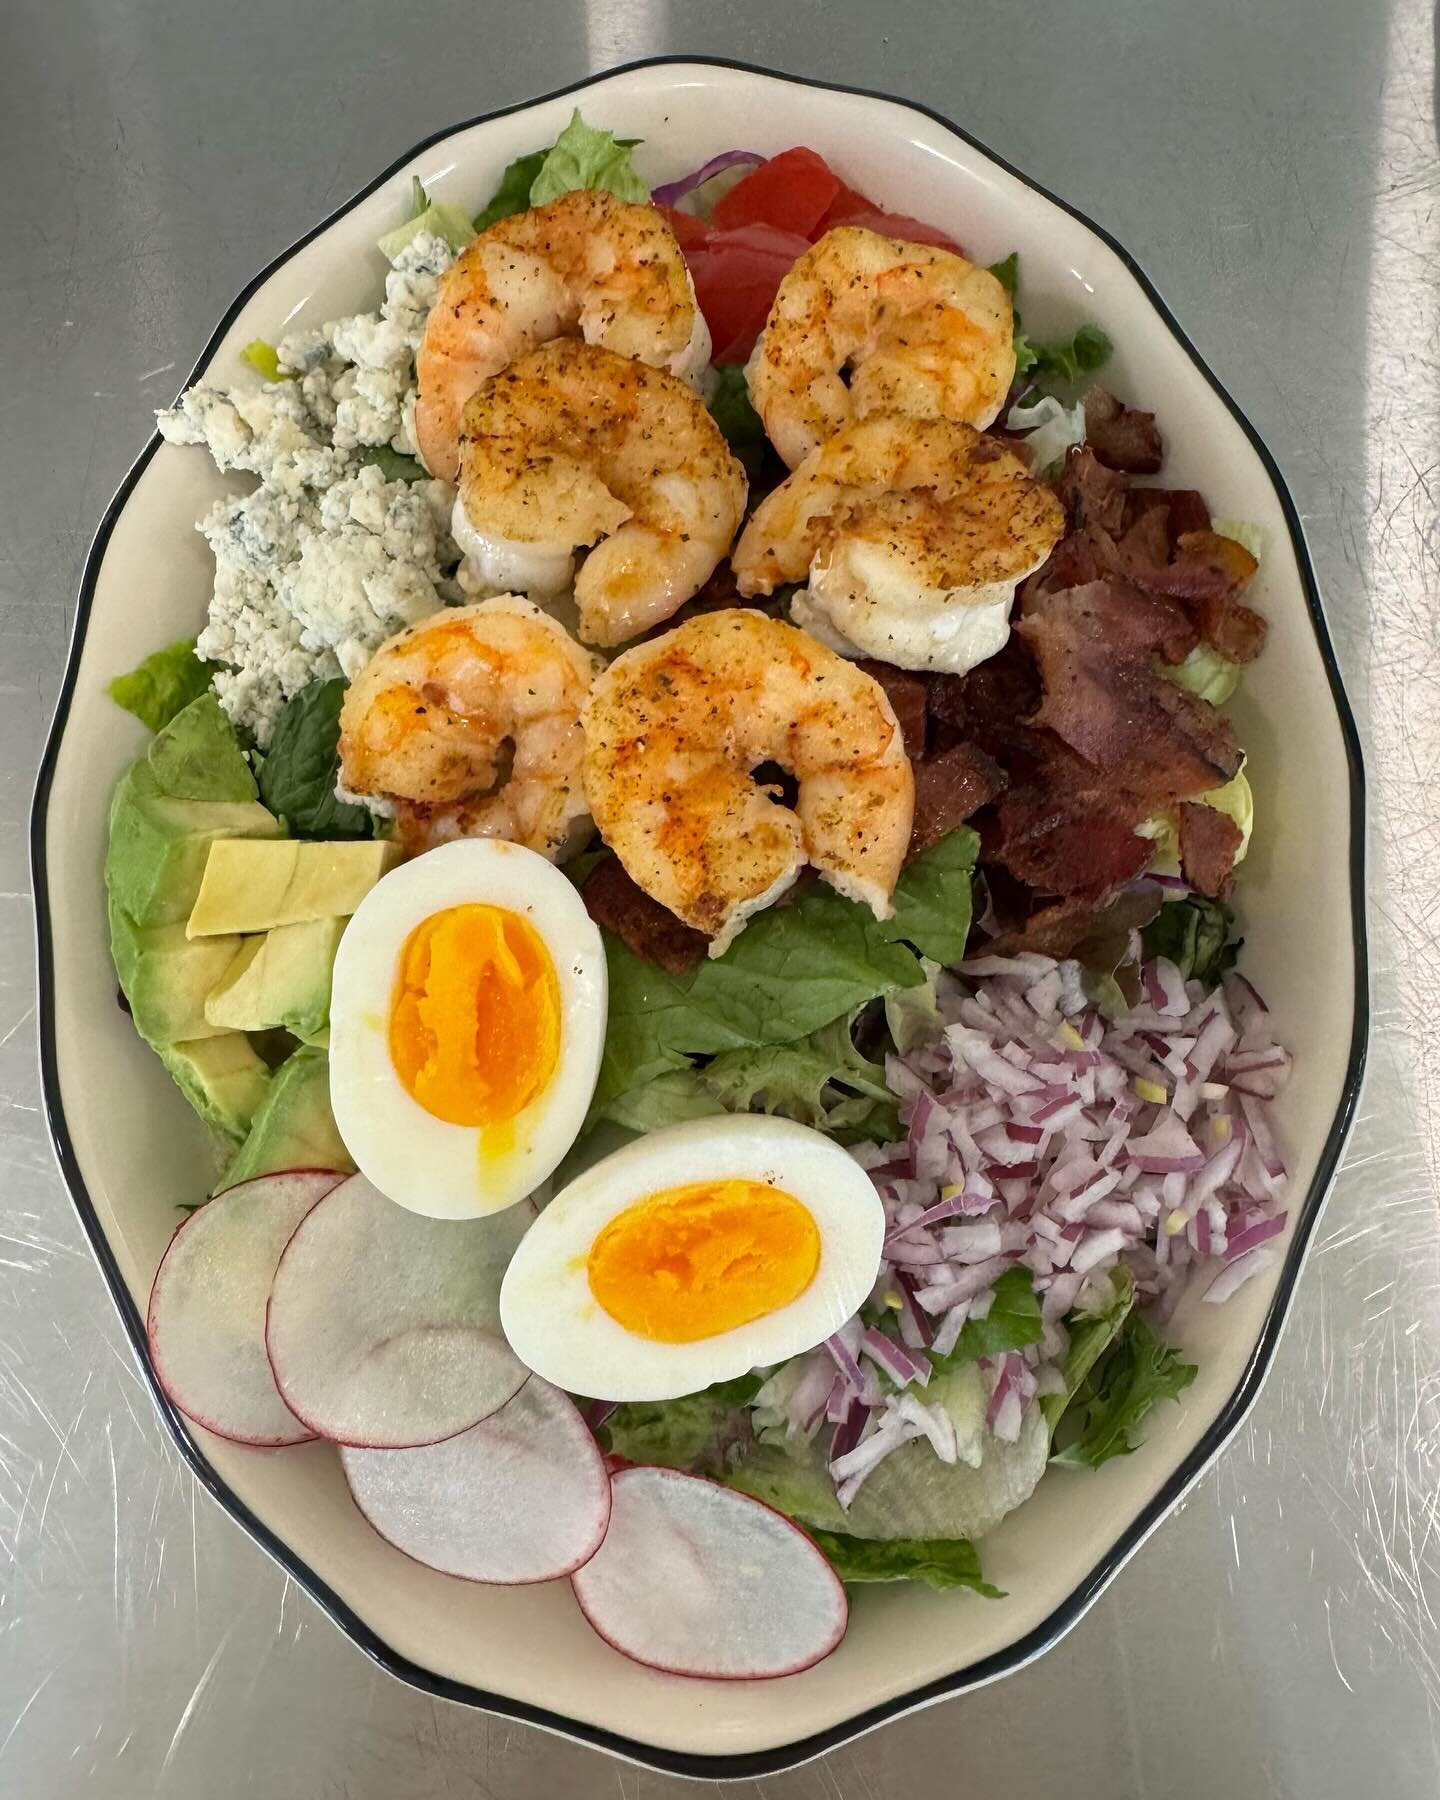 CHILLED SALADS: The Picnic Cobb with Shrimp